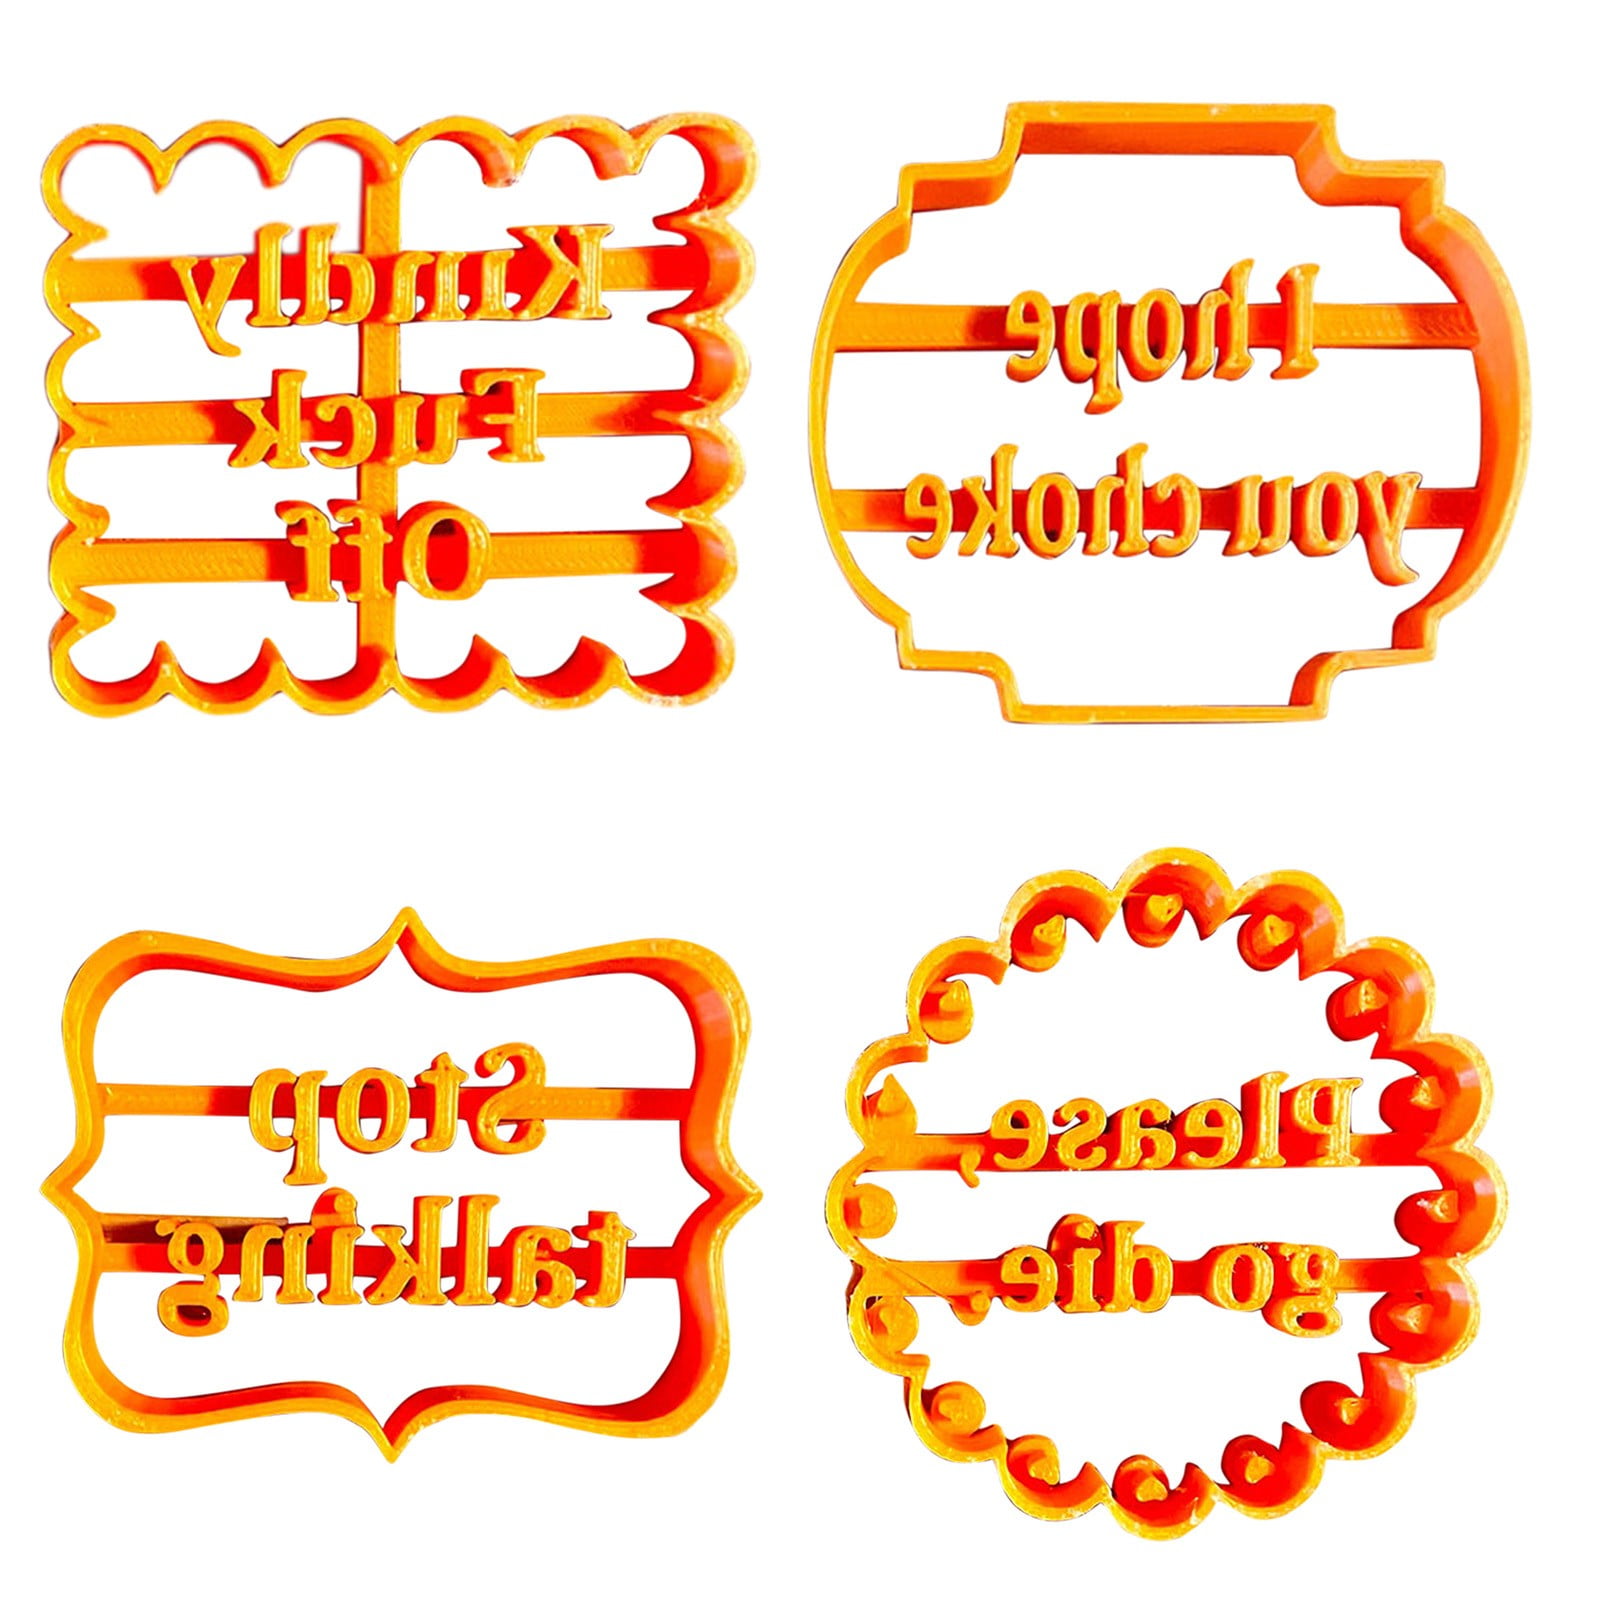 4Pcs Cookie Molds With Good Wishes Cookie Form W/ Fun Irreverent Phrases Moulds 